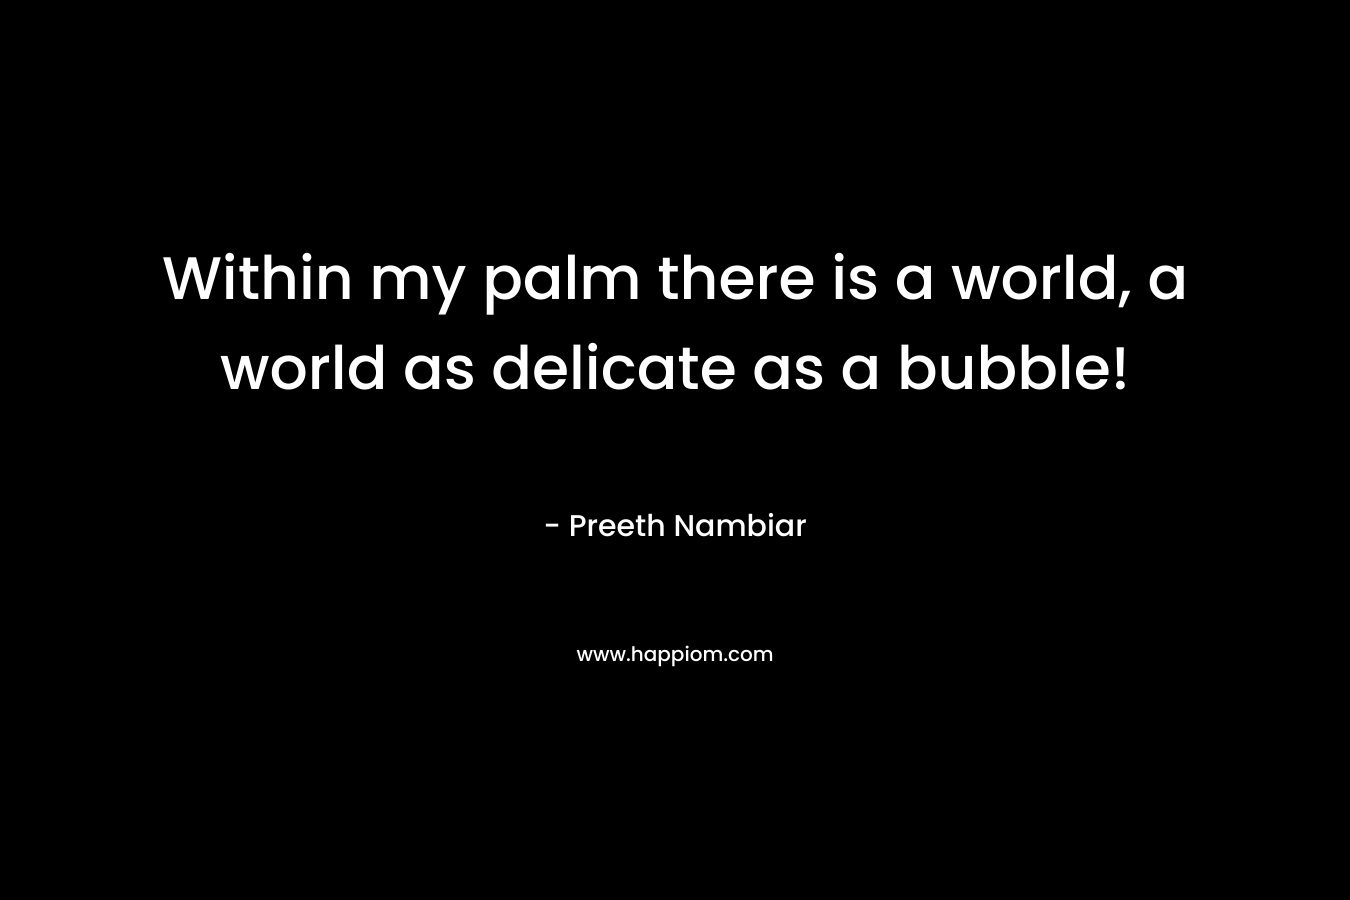 Within my palm there is a world, a world as delicate as a bubble! – Preeth Nambiar